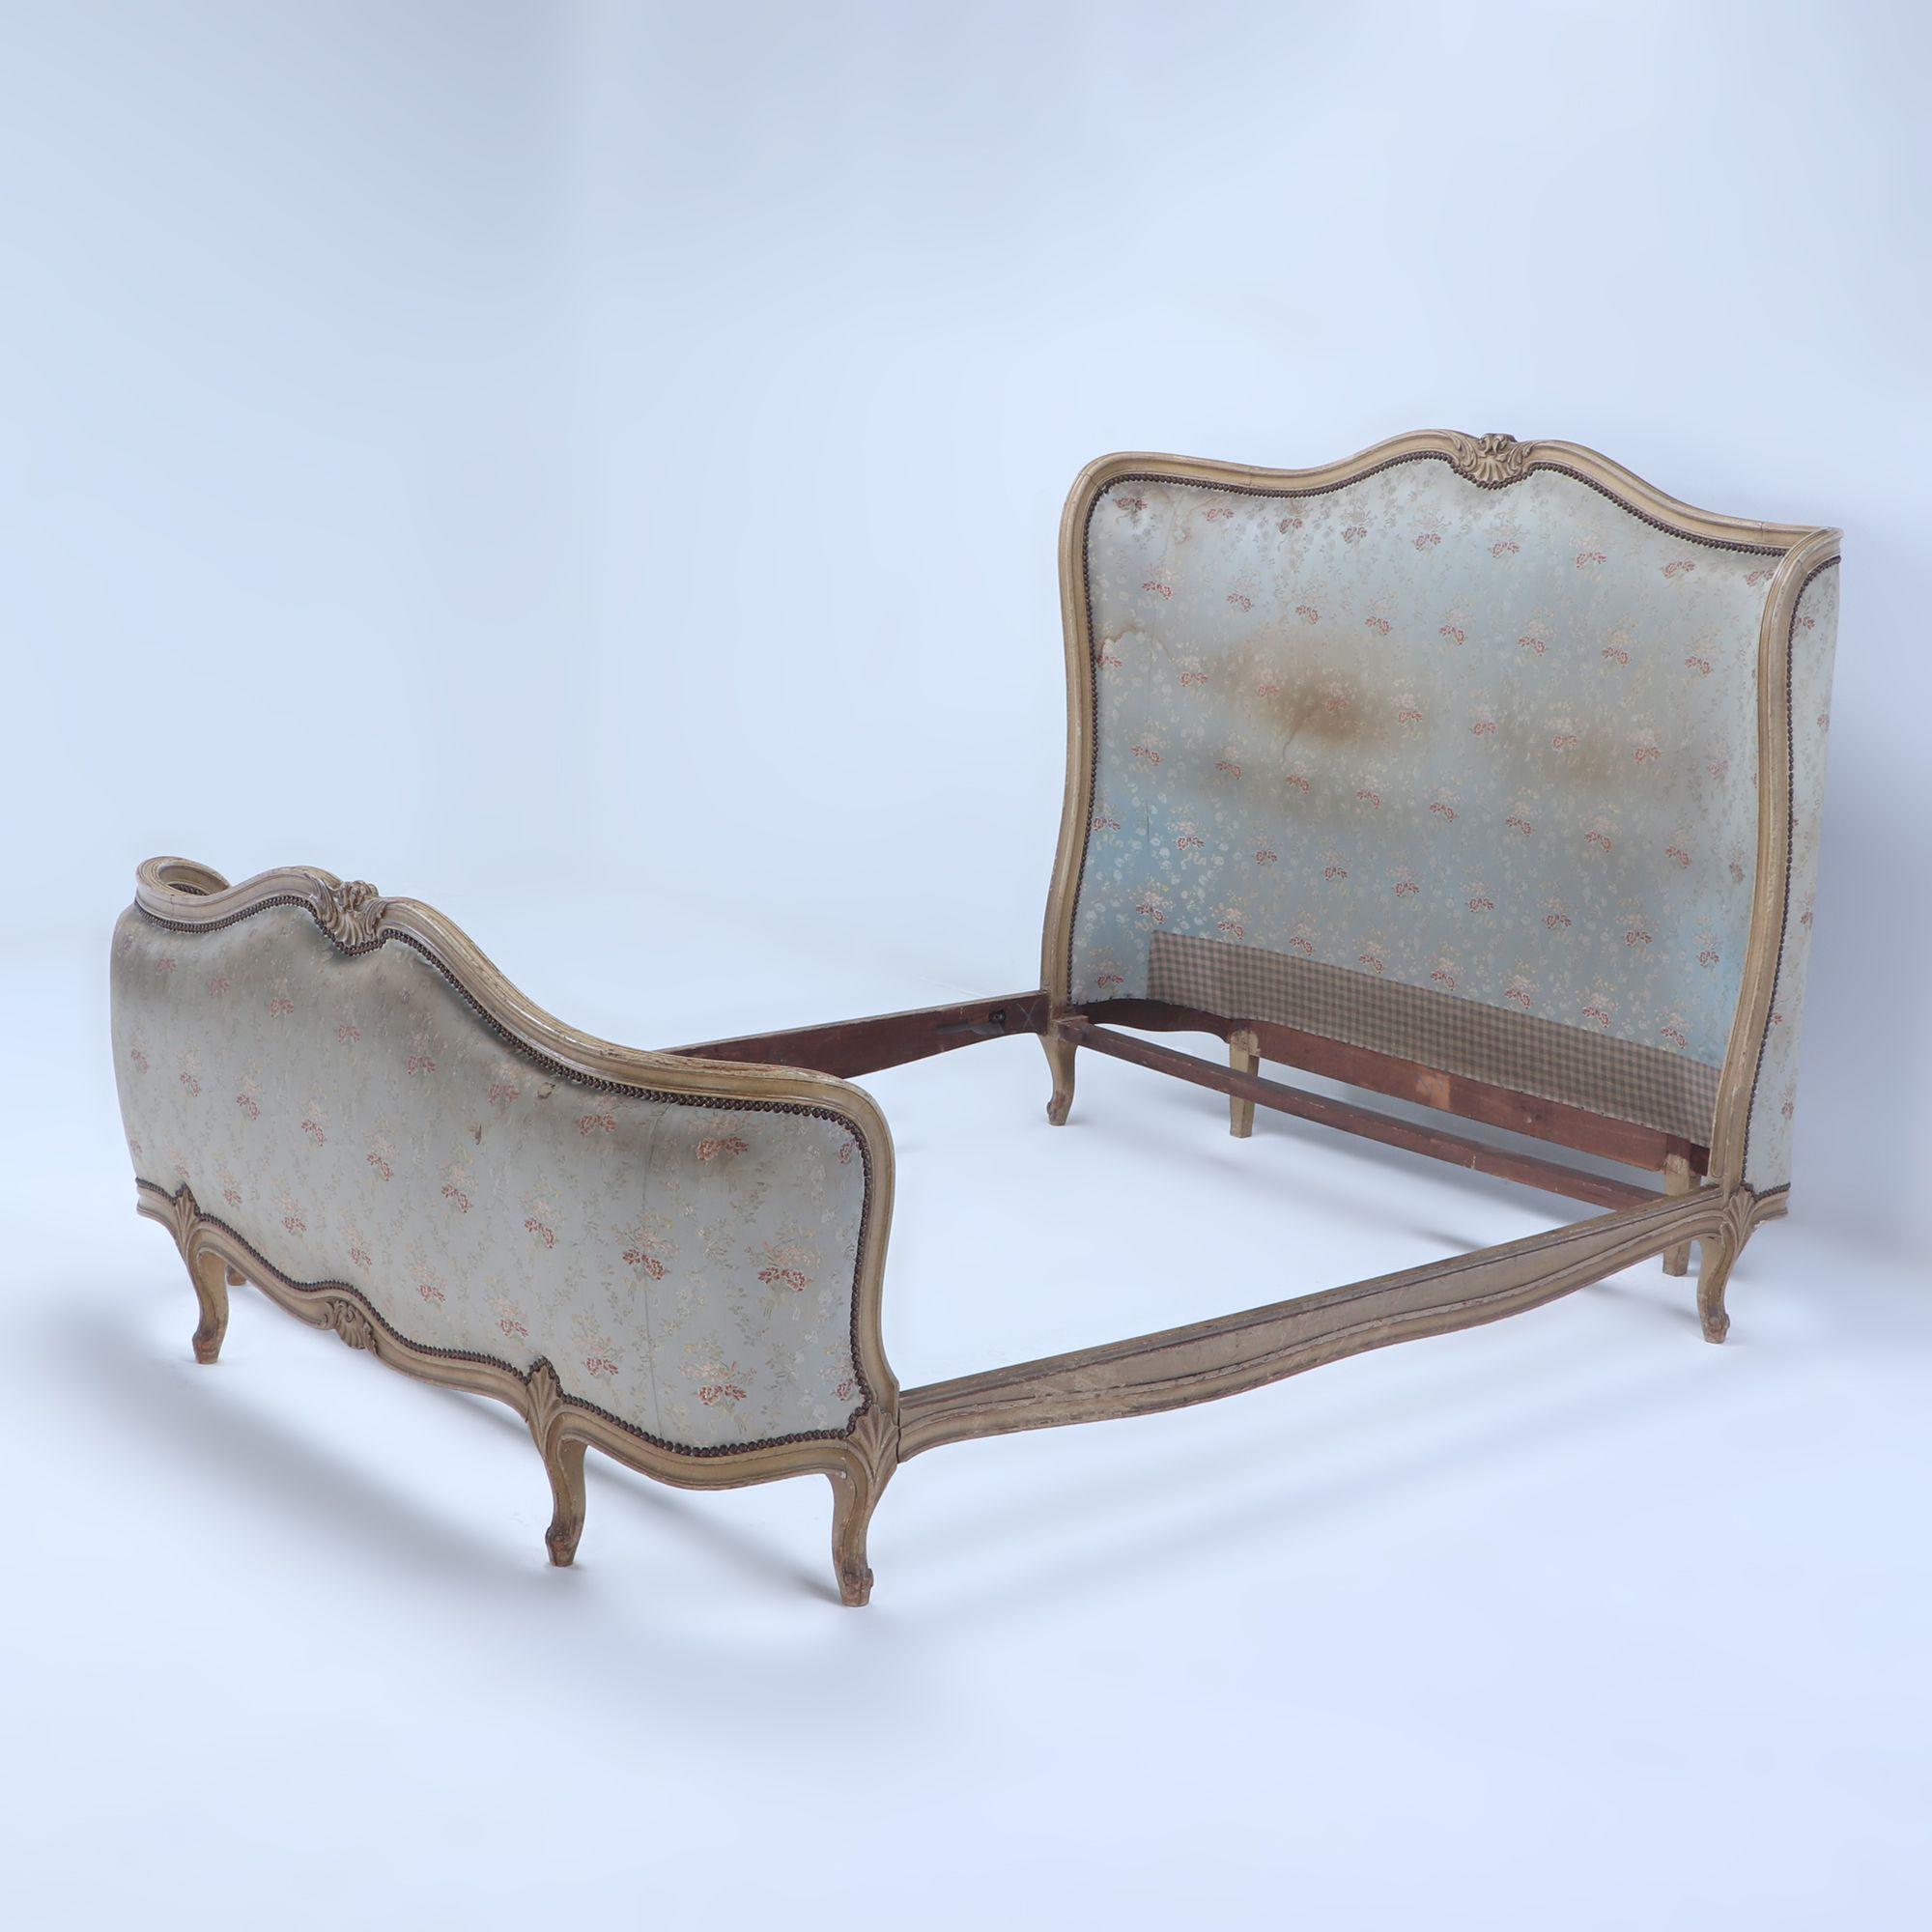 A painted French Louis XV style bed having a curved footboard in old fabric C 1920. Interior Dimensions: 81